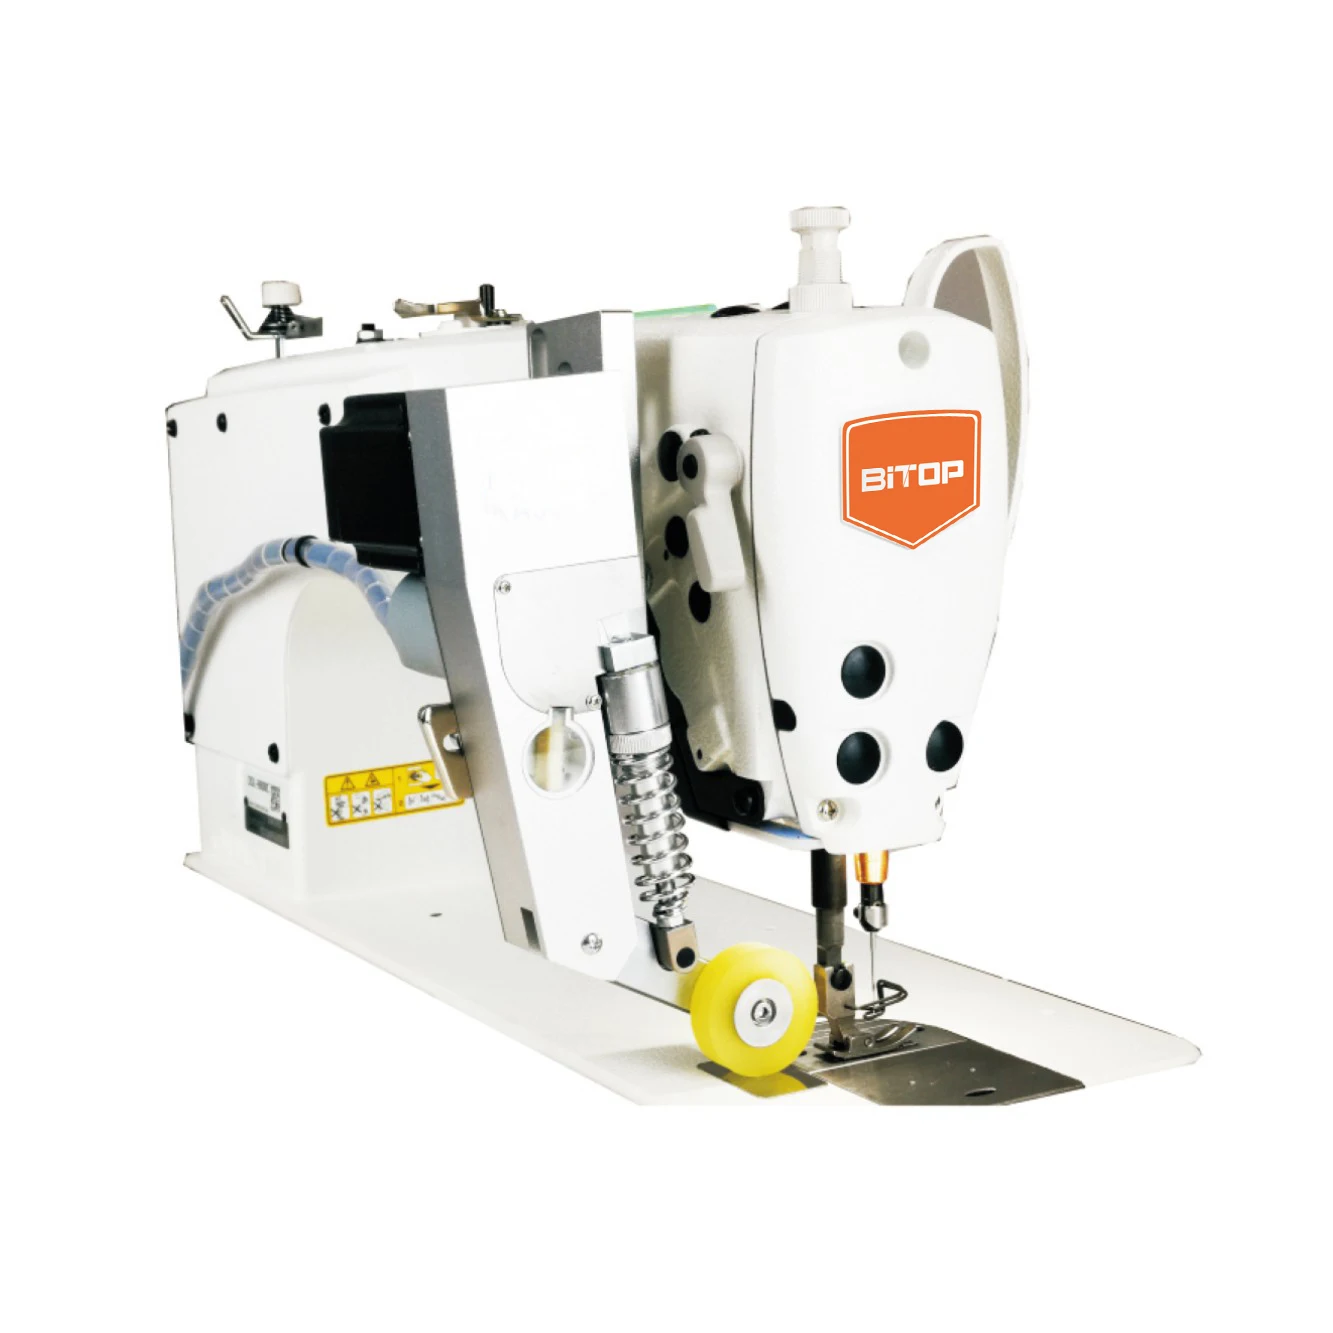 Electric sowing machine direct from - Sewing Machines & Sergers - Port  Harcourt